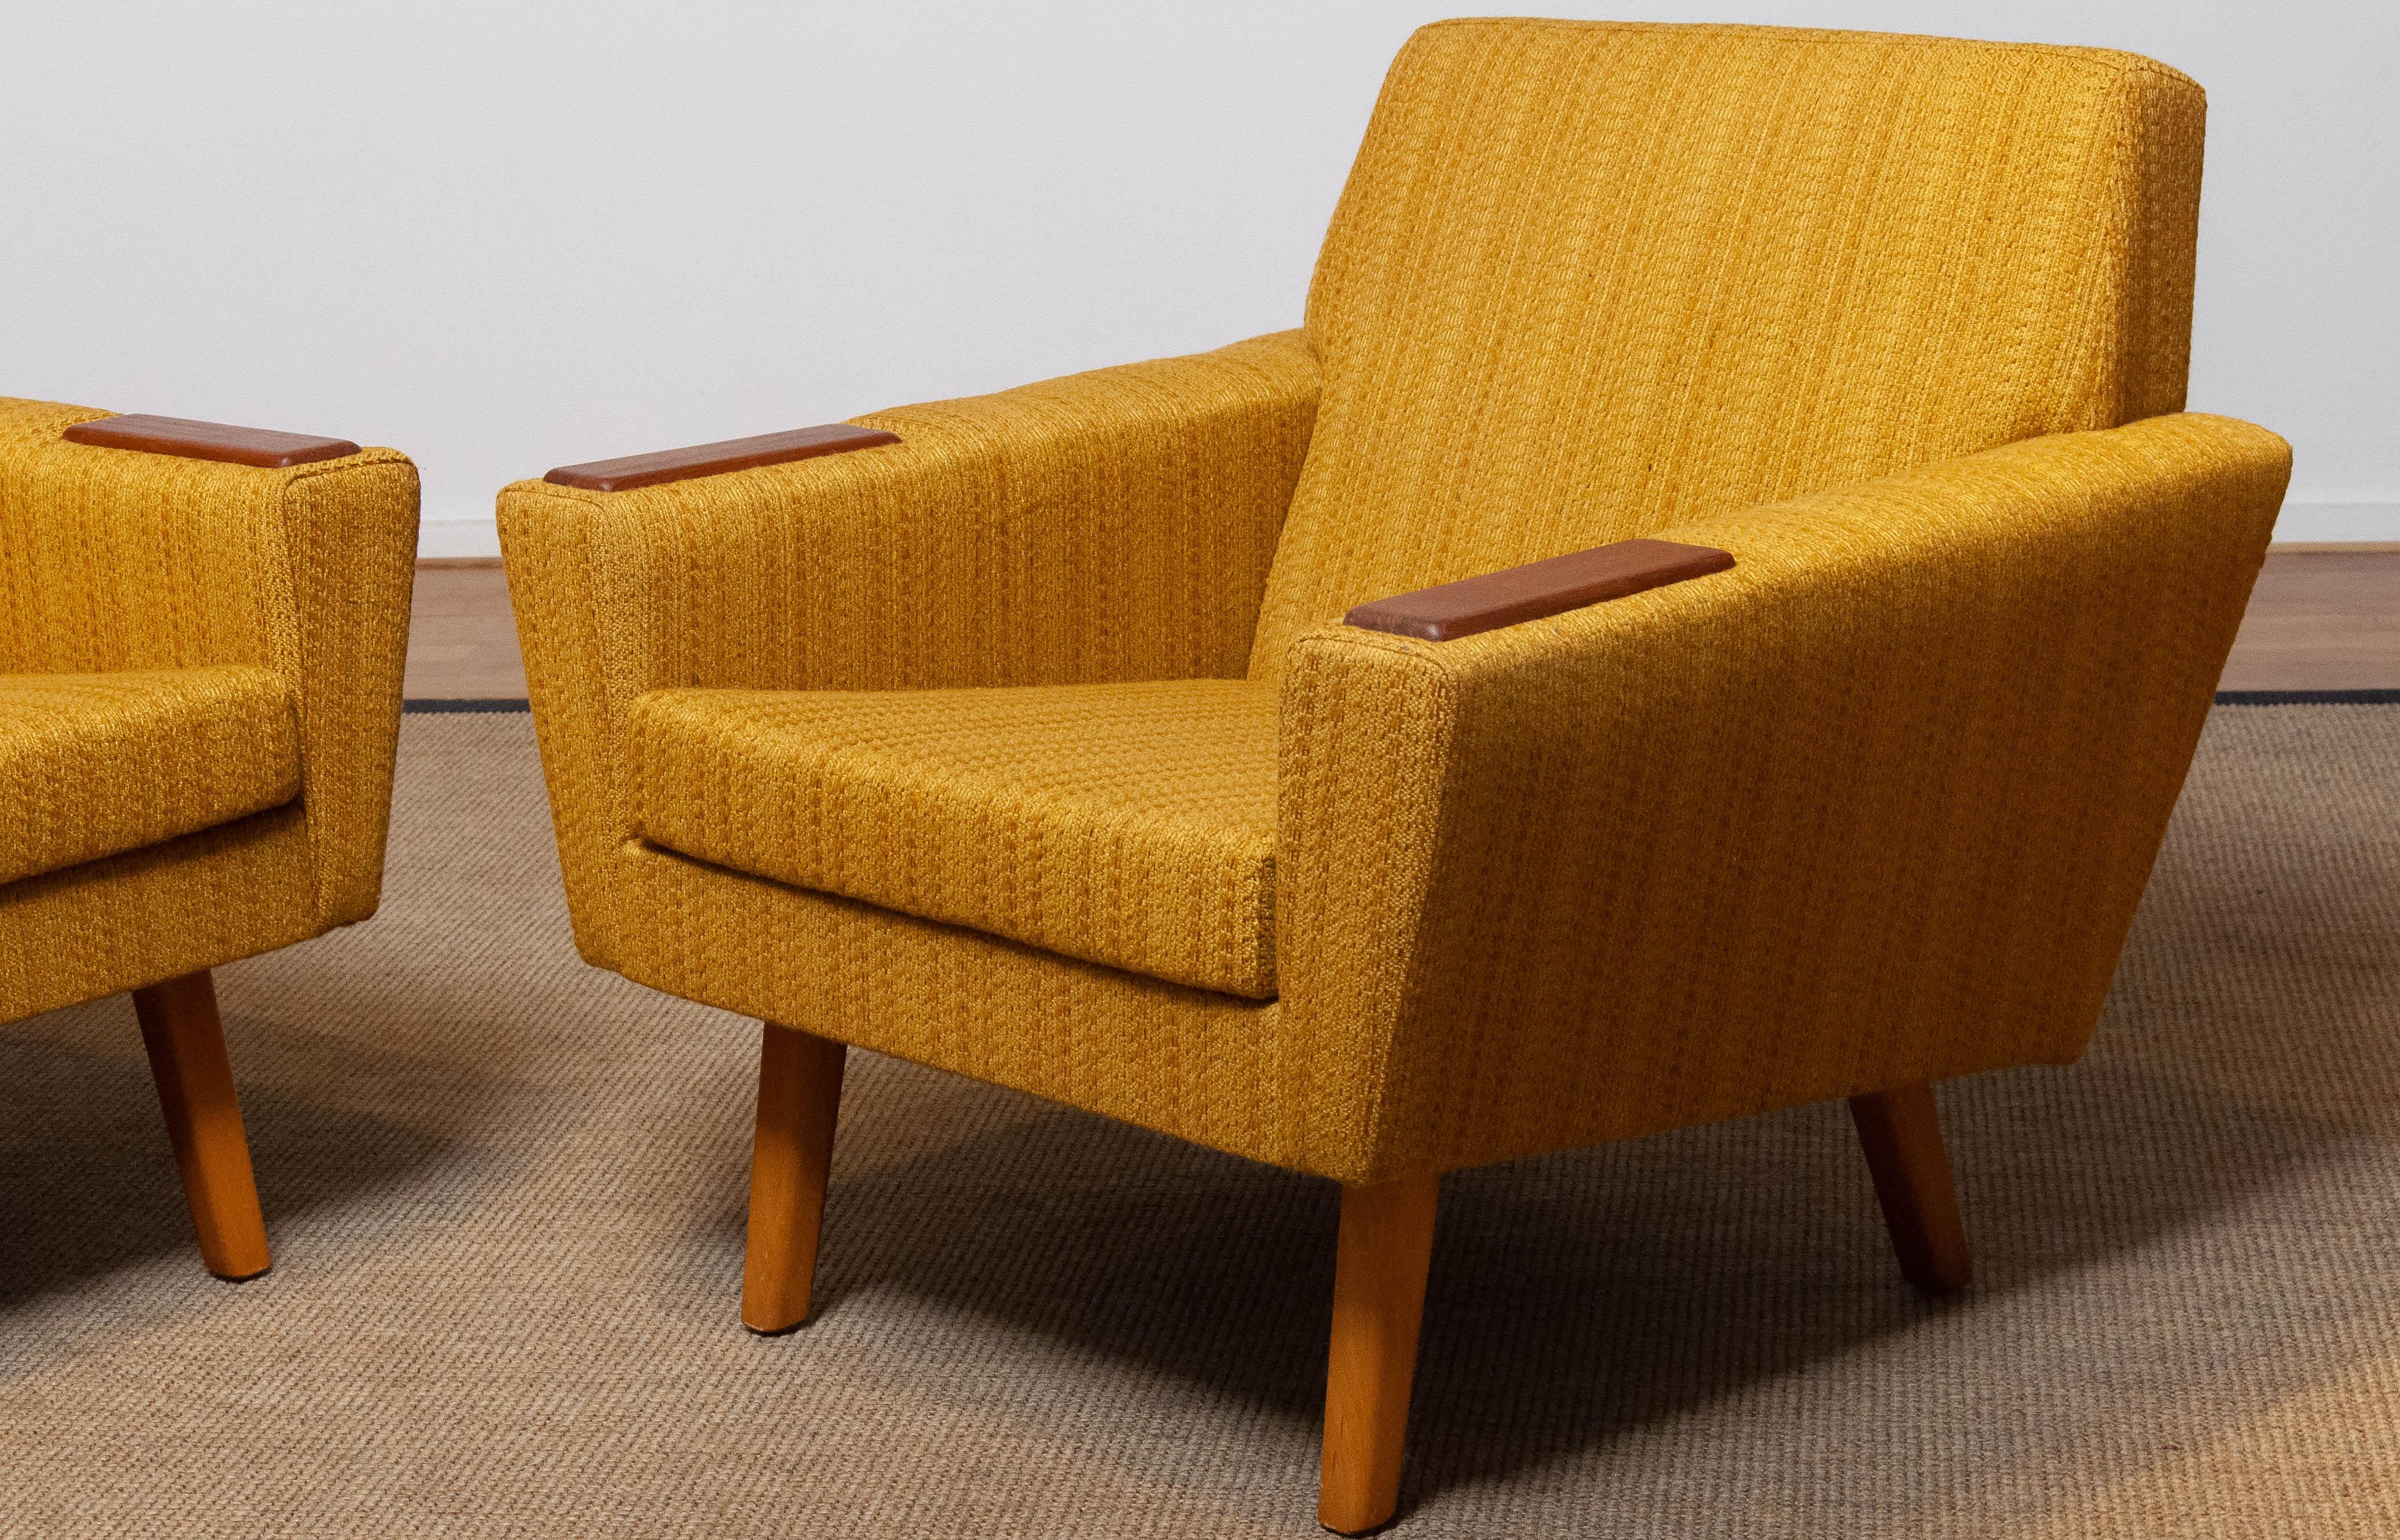 Pair of absolutely beautiful and typical Scandinavian mid century lounge chairs in yellow / ocher and a little brown blended colored woolen fabric in complete original condition. These chairs supports and sits very good and are in allover very good